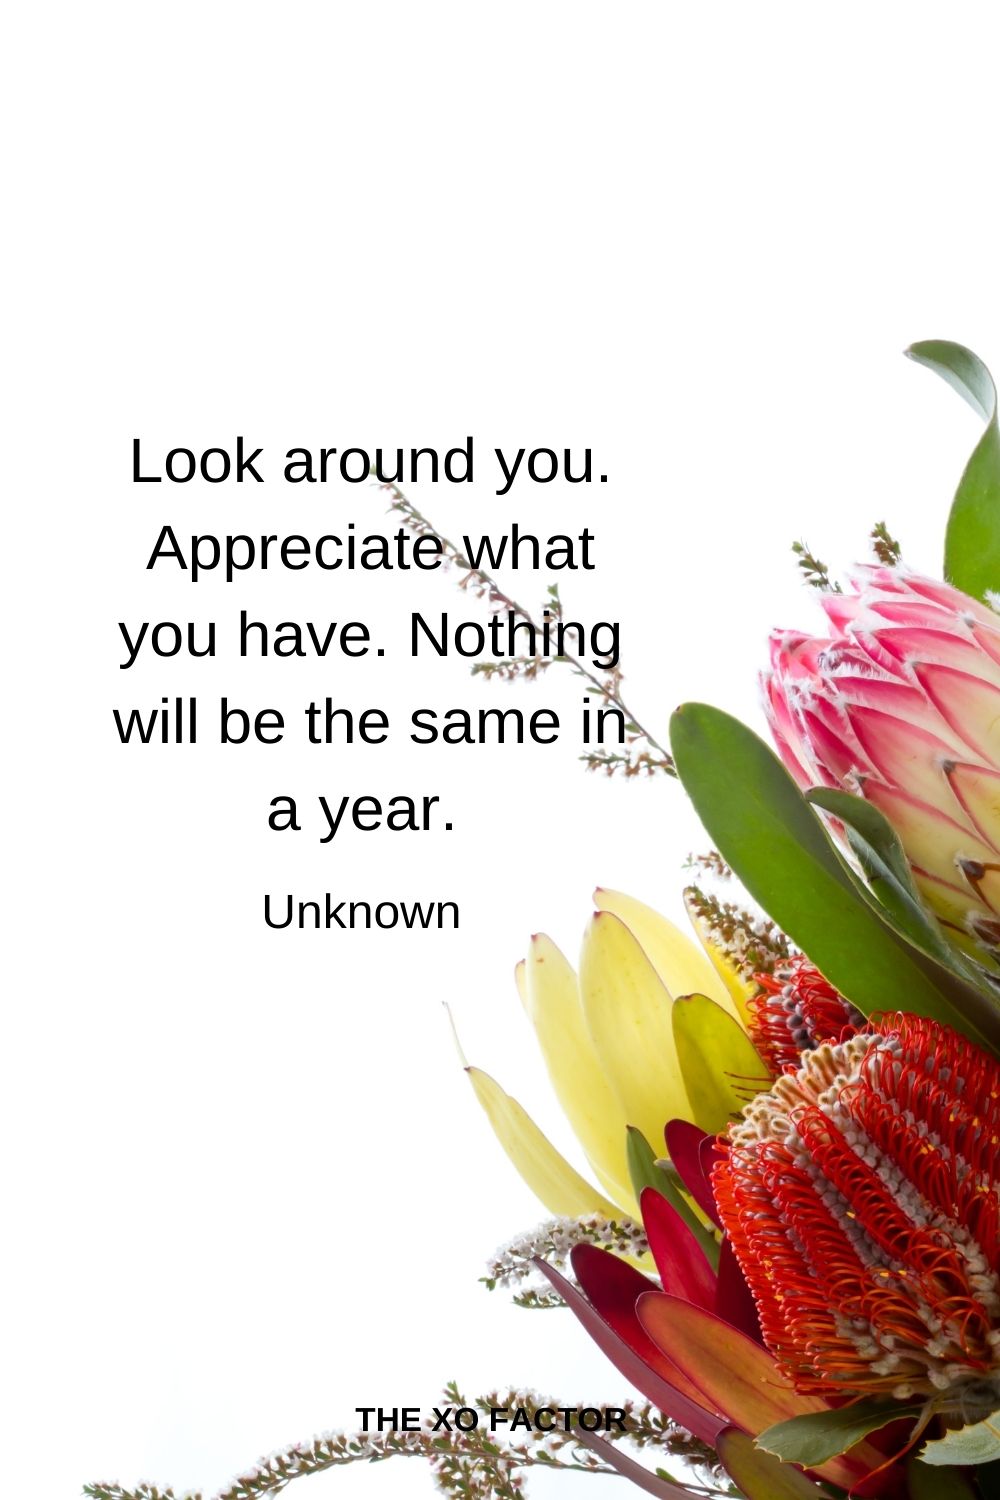 Look around you. Appreciate what you have. Nothing will be the same in a year.  Unknown